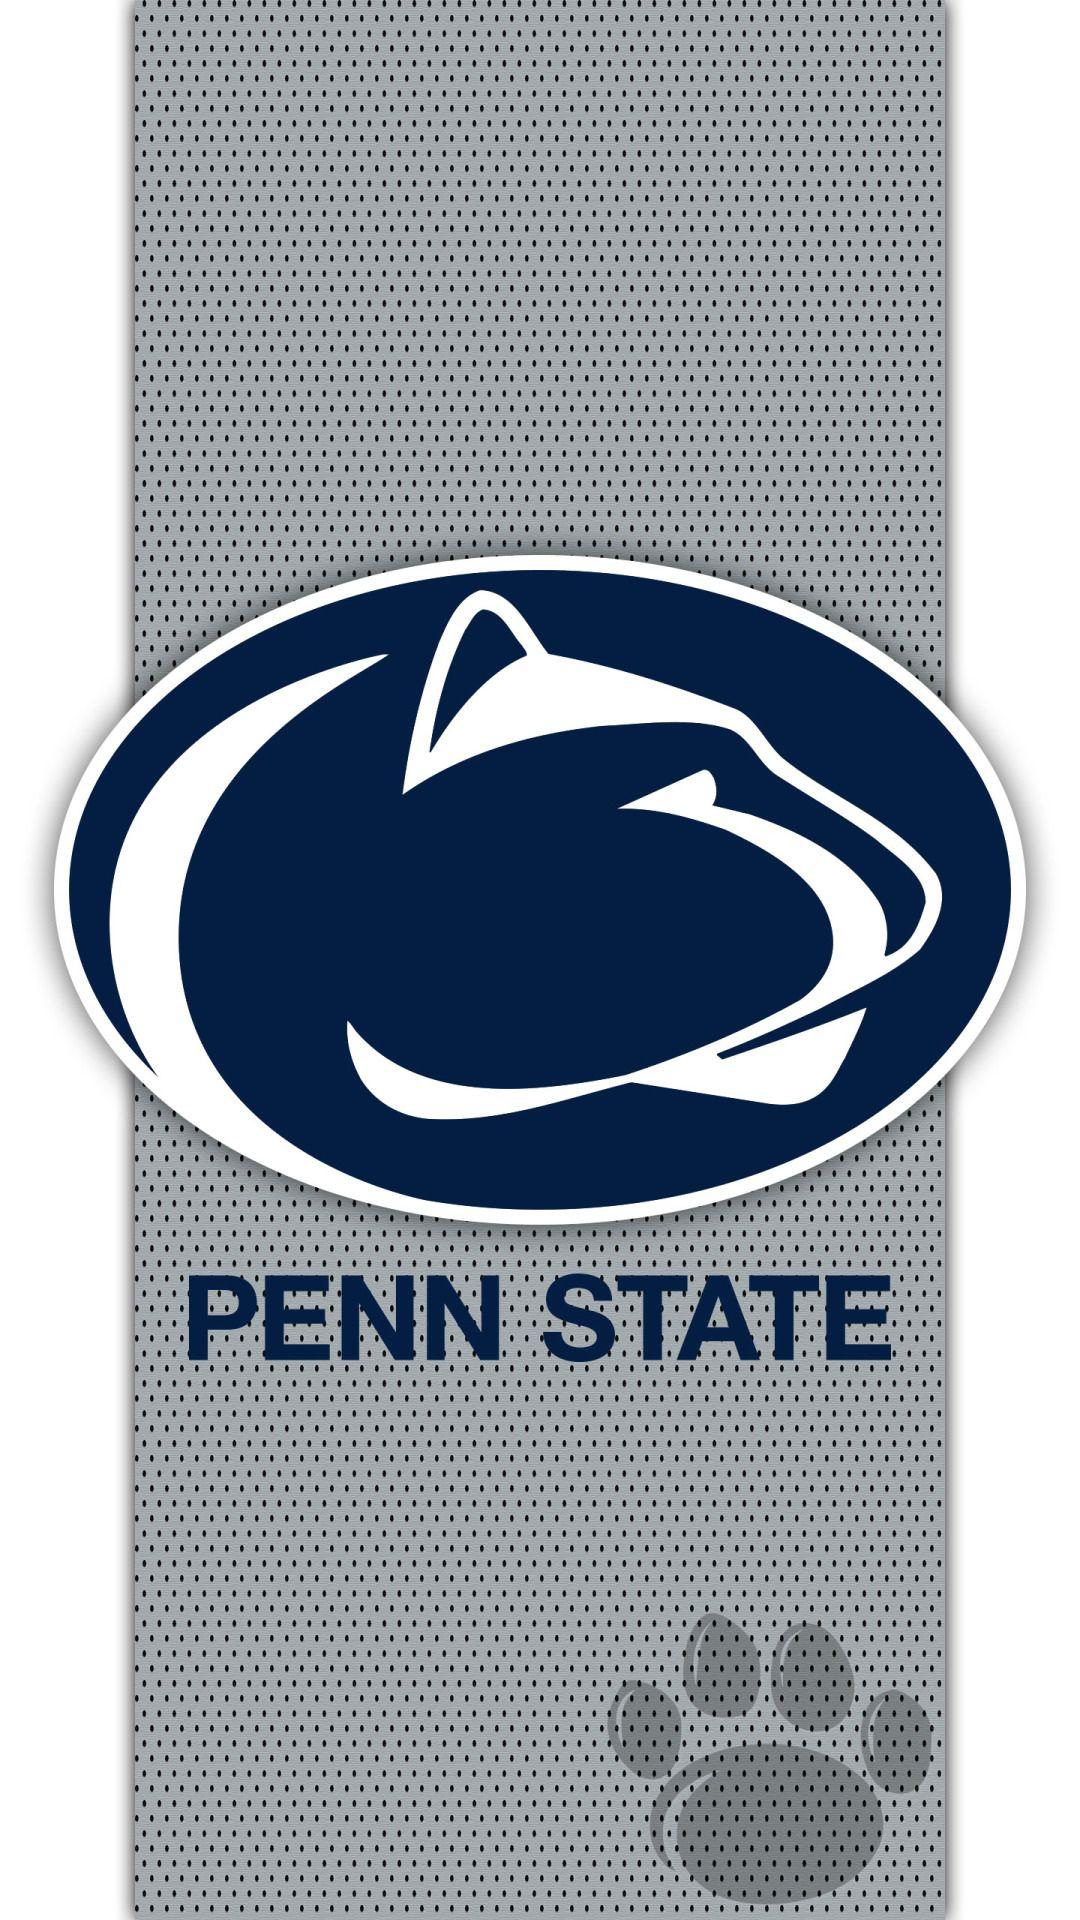 Penn State Nittany Lions A cell phone wallpaper